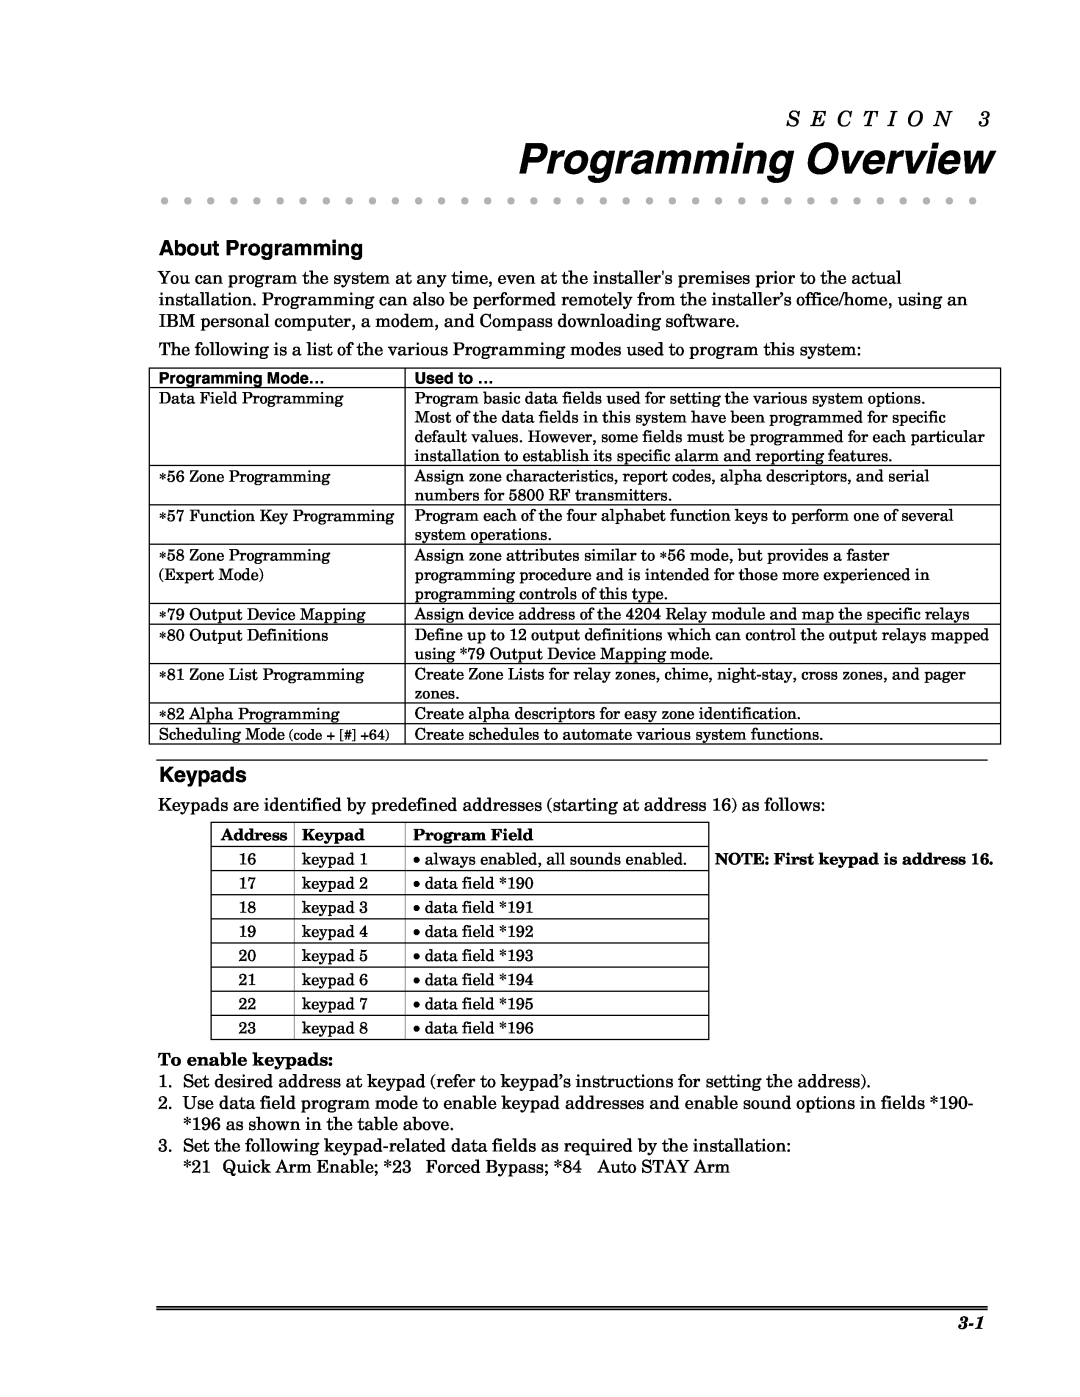 Honeywell VISTA-10PSIA, Ademco Security Systems setup guide Programming Overview, About Programming, Keypads, S E C T I O N 